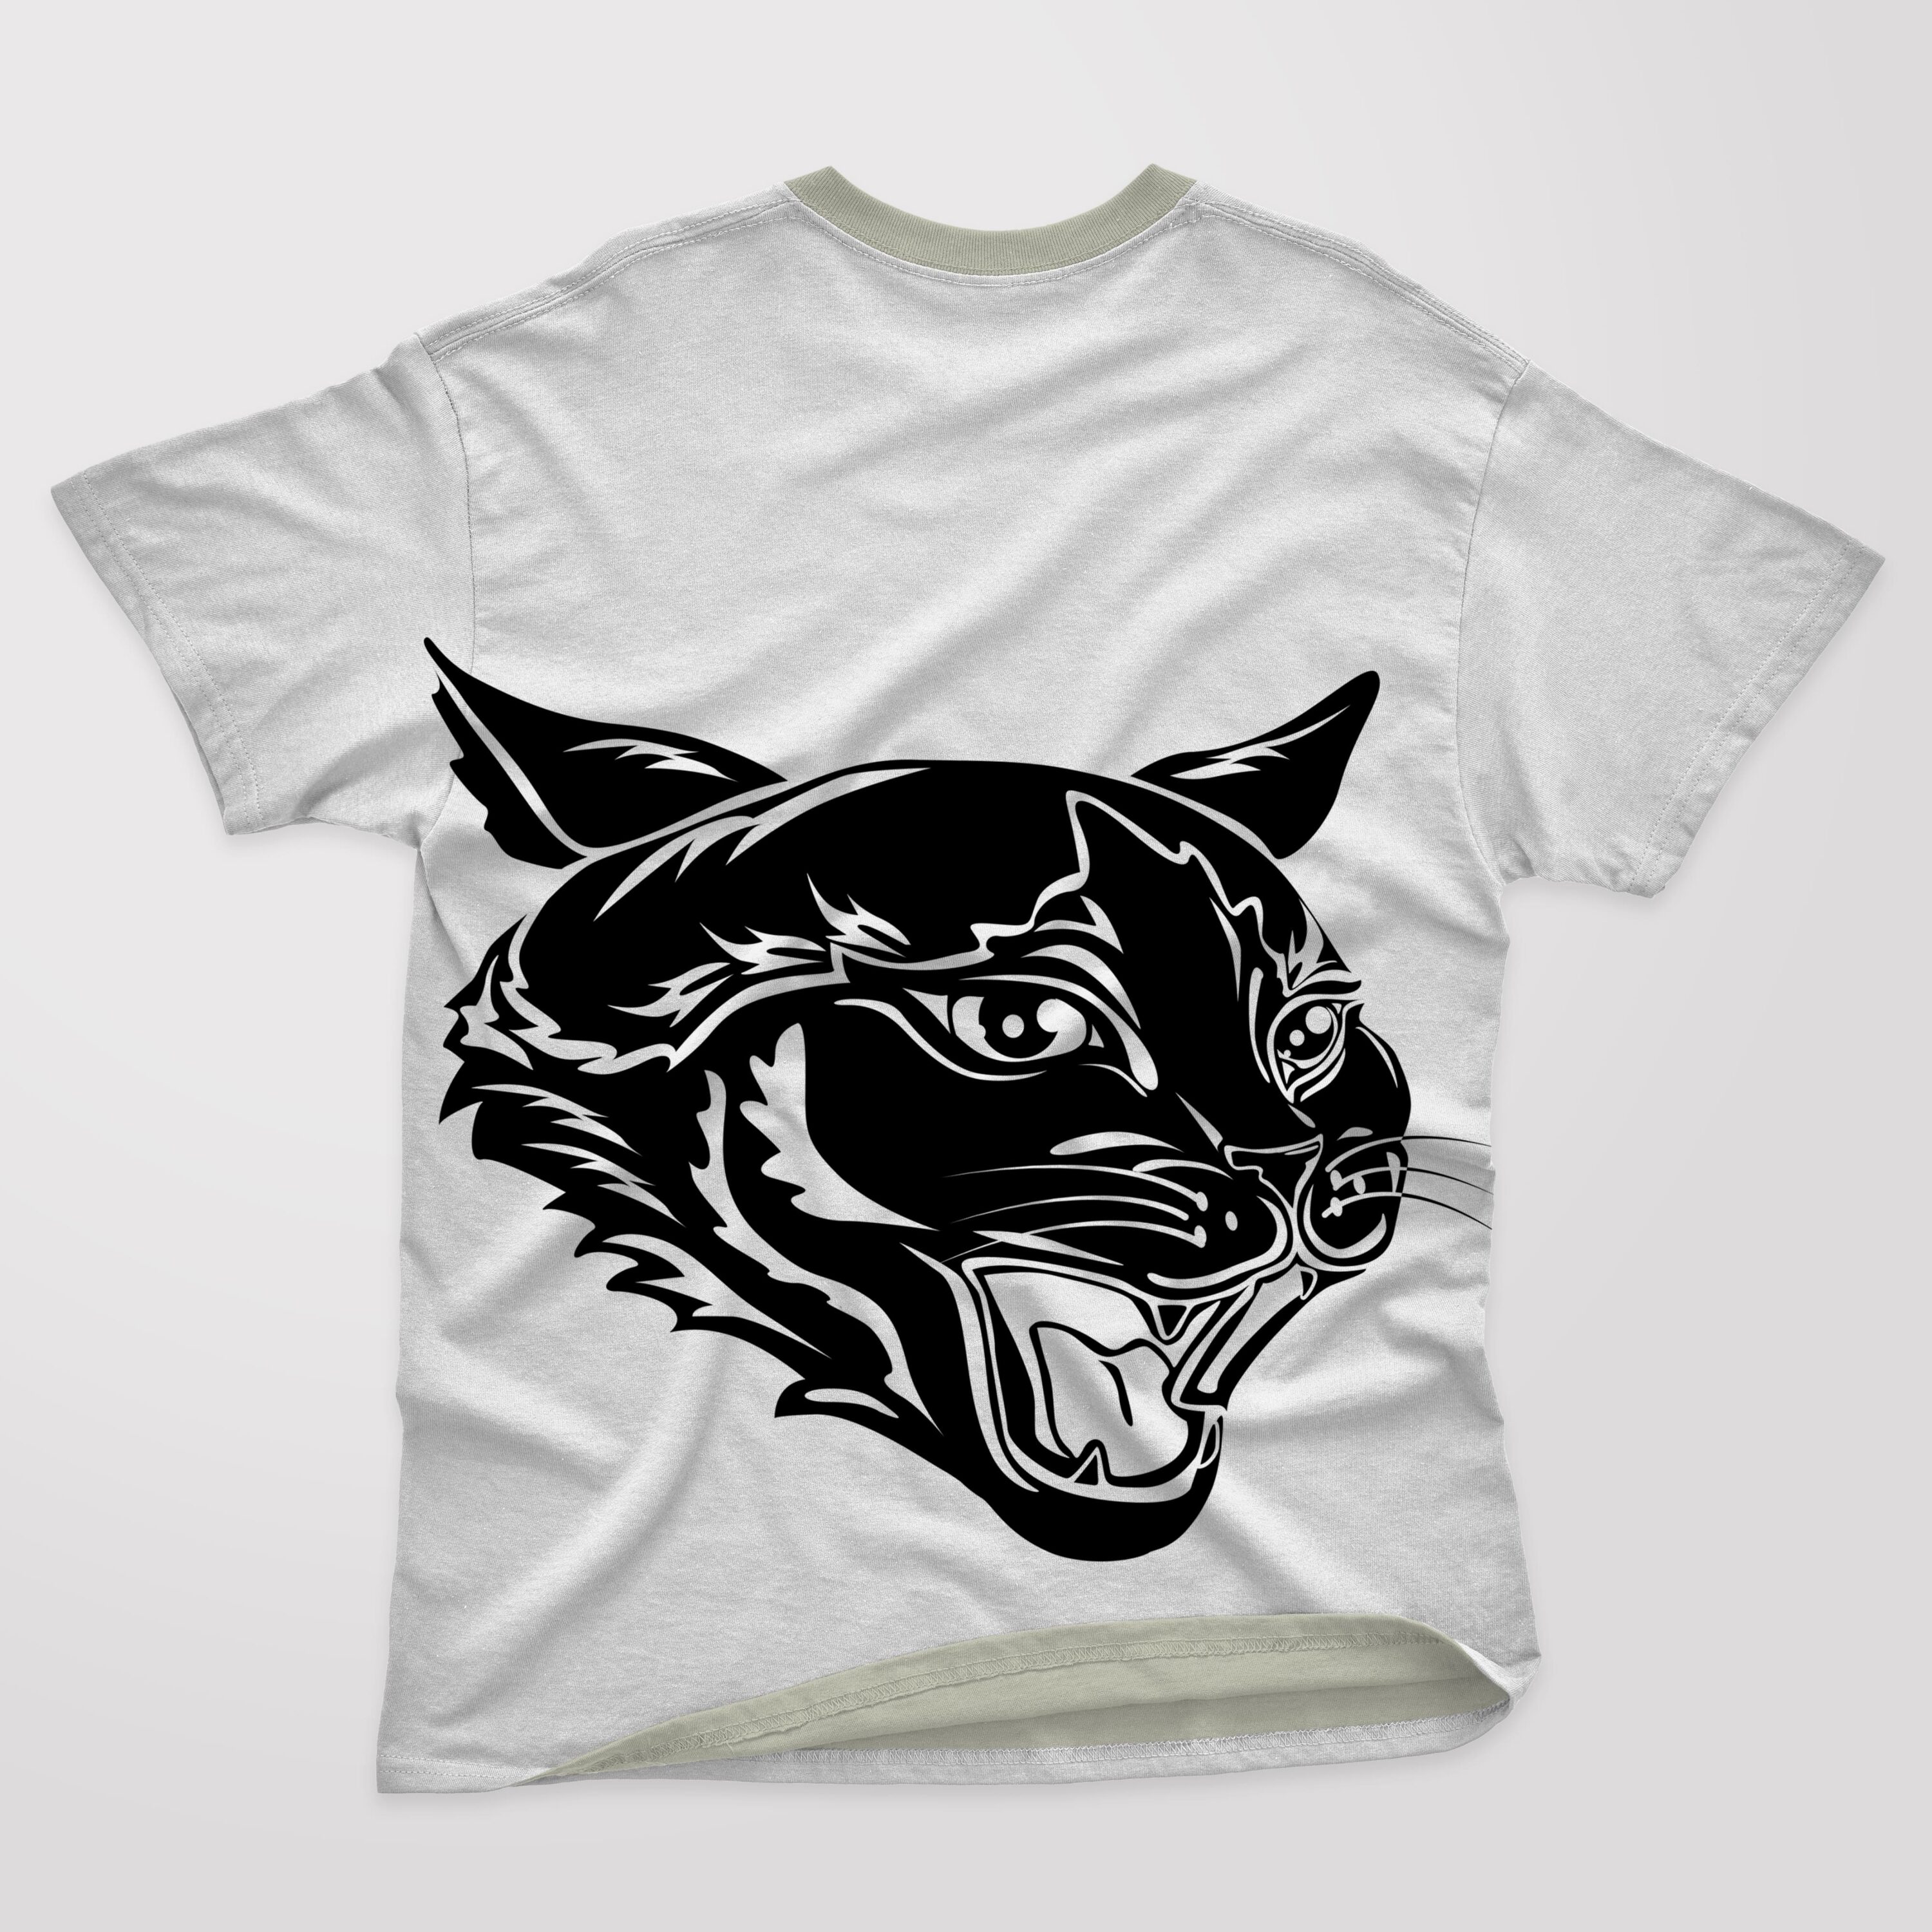 White T-shirt with a grey collar and a silhouette face of a angry cat.